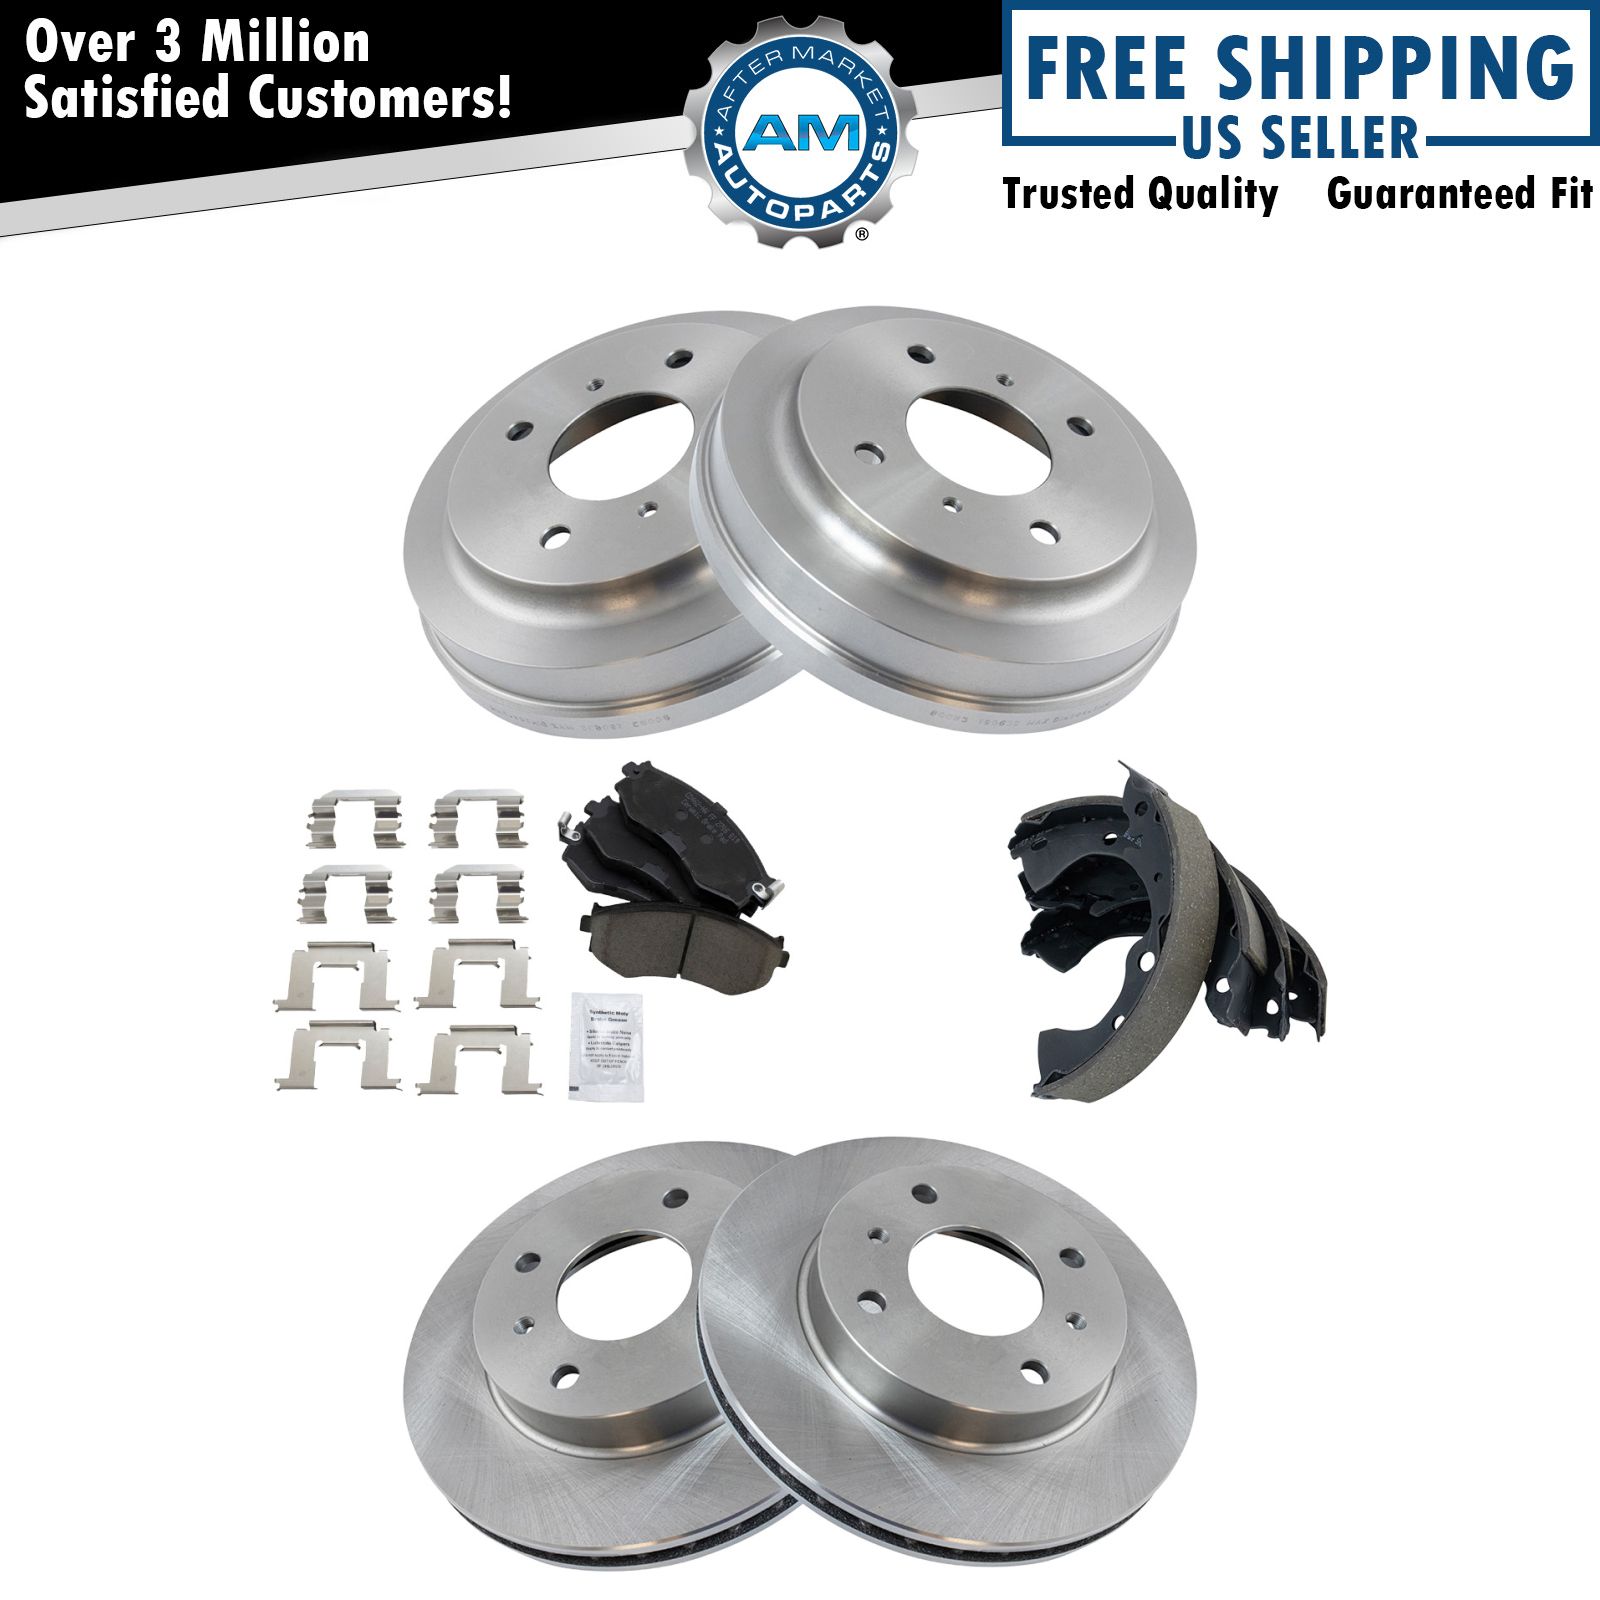 Brake Rotors Pads Drums Shoes Kit Front & Rear for 01-06 Nissan Sentra